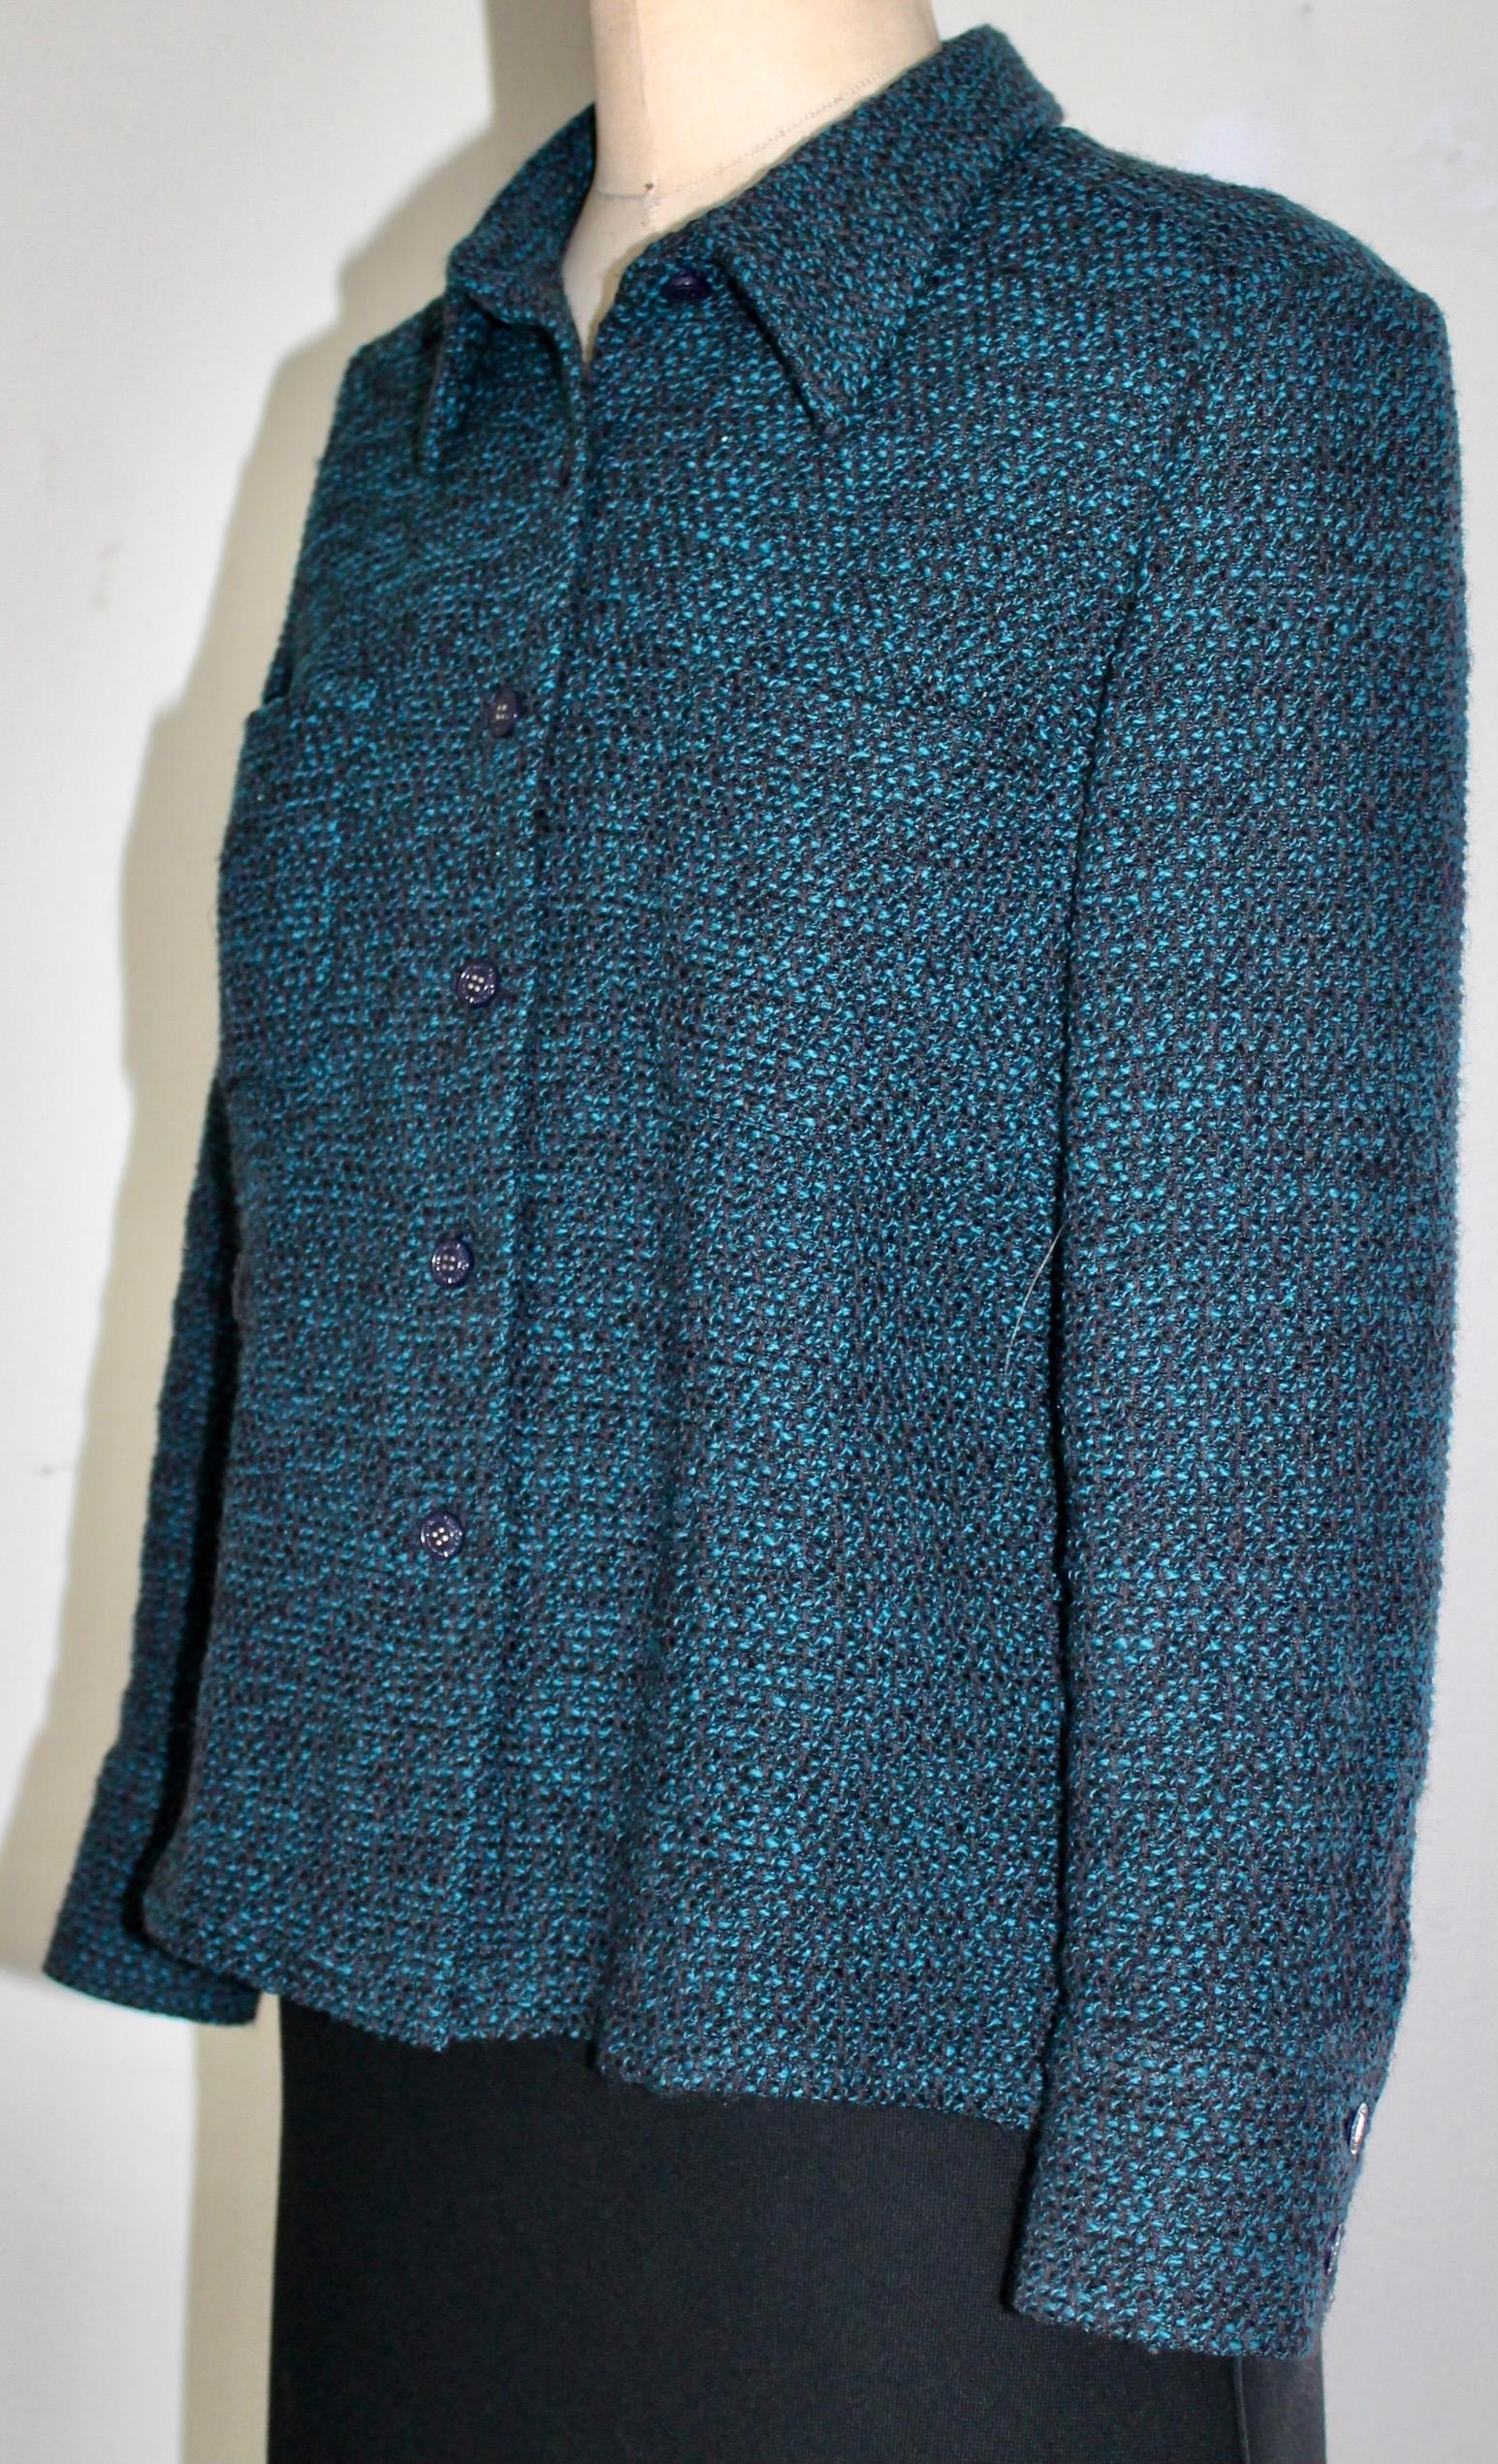 A blue Green Tweed Jacket 21c. Silk lining at top of back only. Slightly padded shoulders with 6 Chanel Buttons on the front and two on the cuffs. Fully labeled.